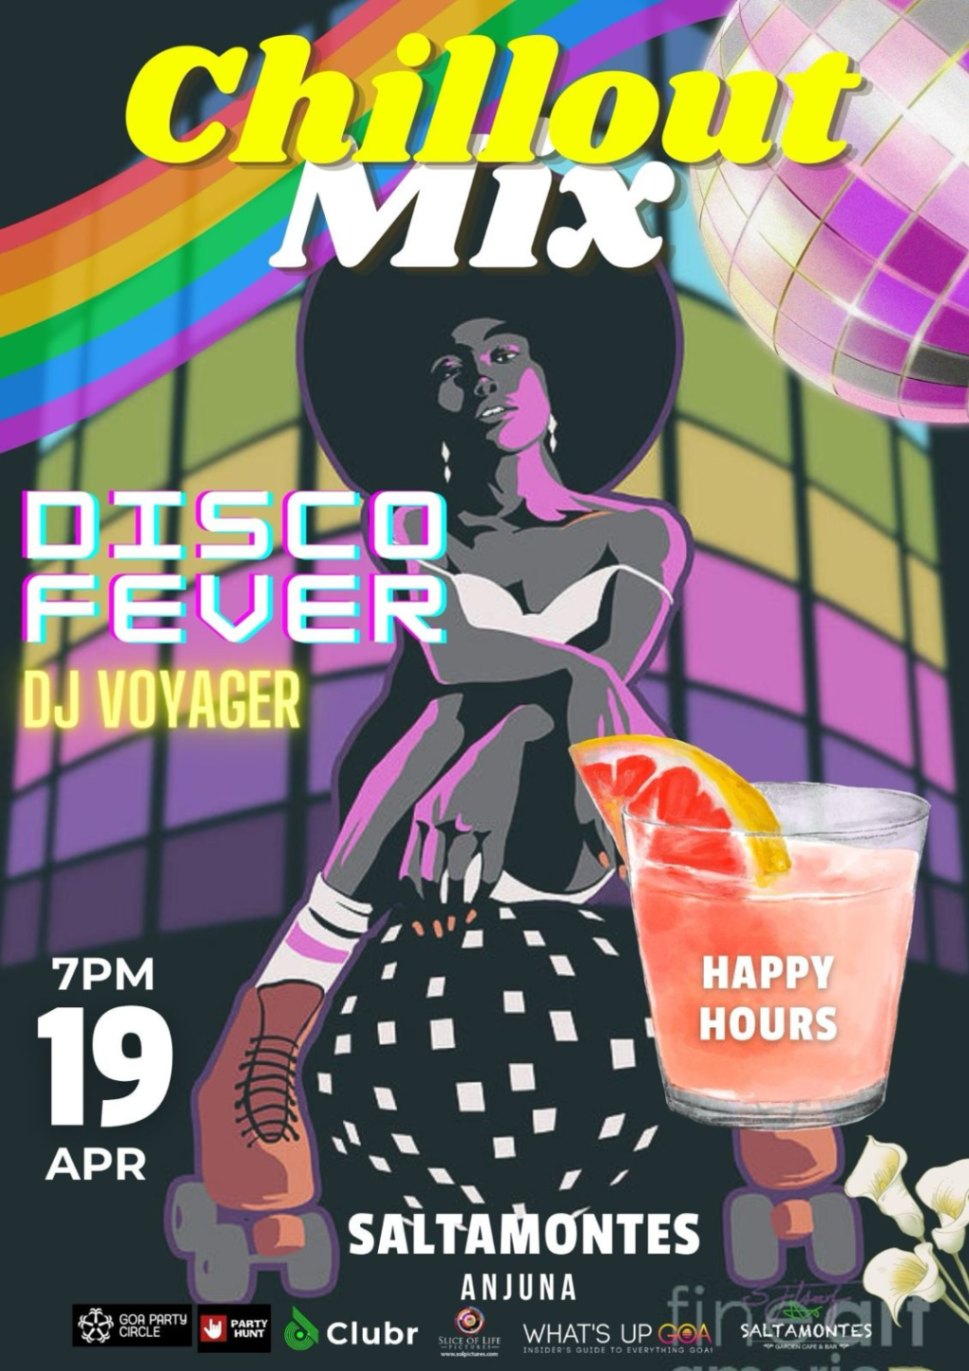 Chillout Mix - Disco Fever - ft DJ Voyager